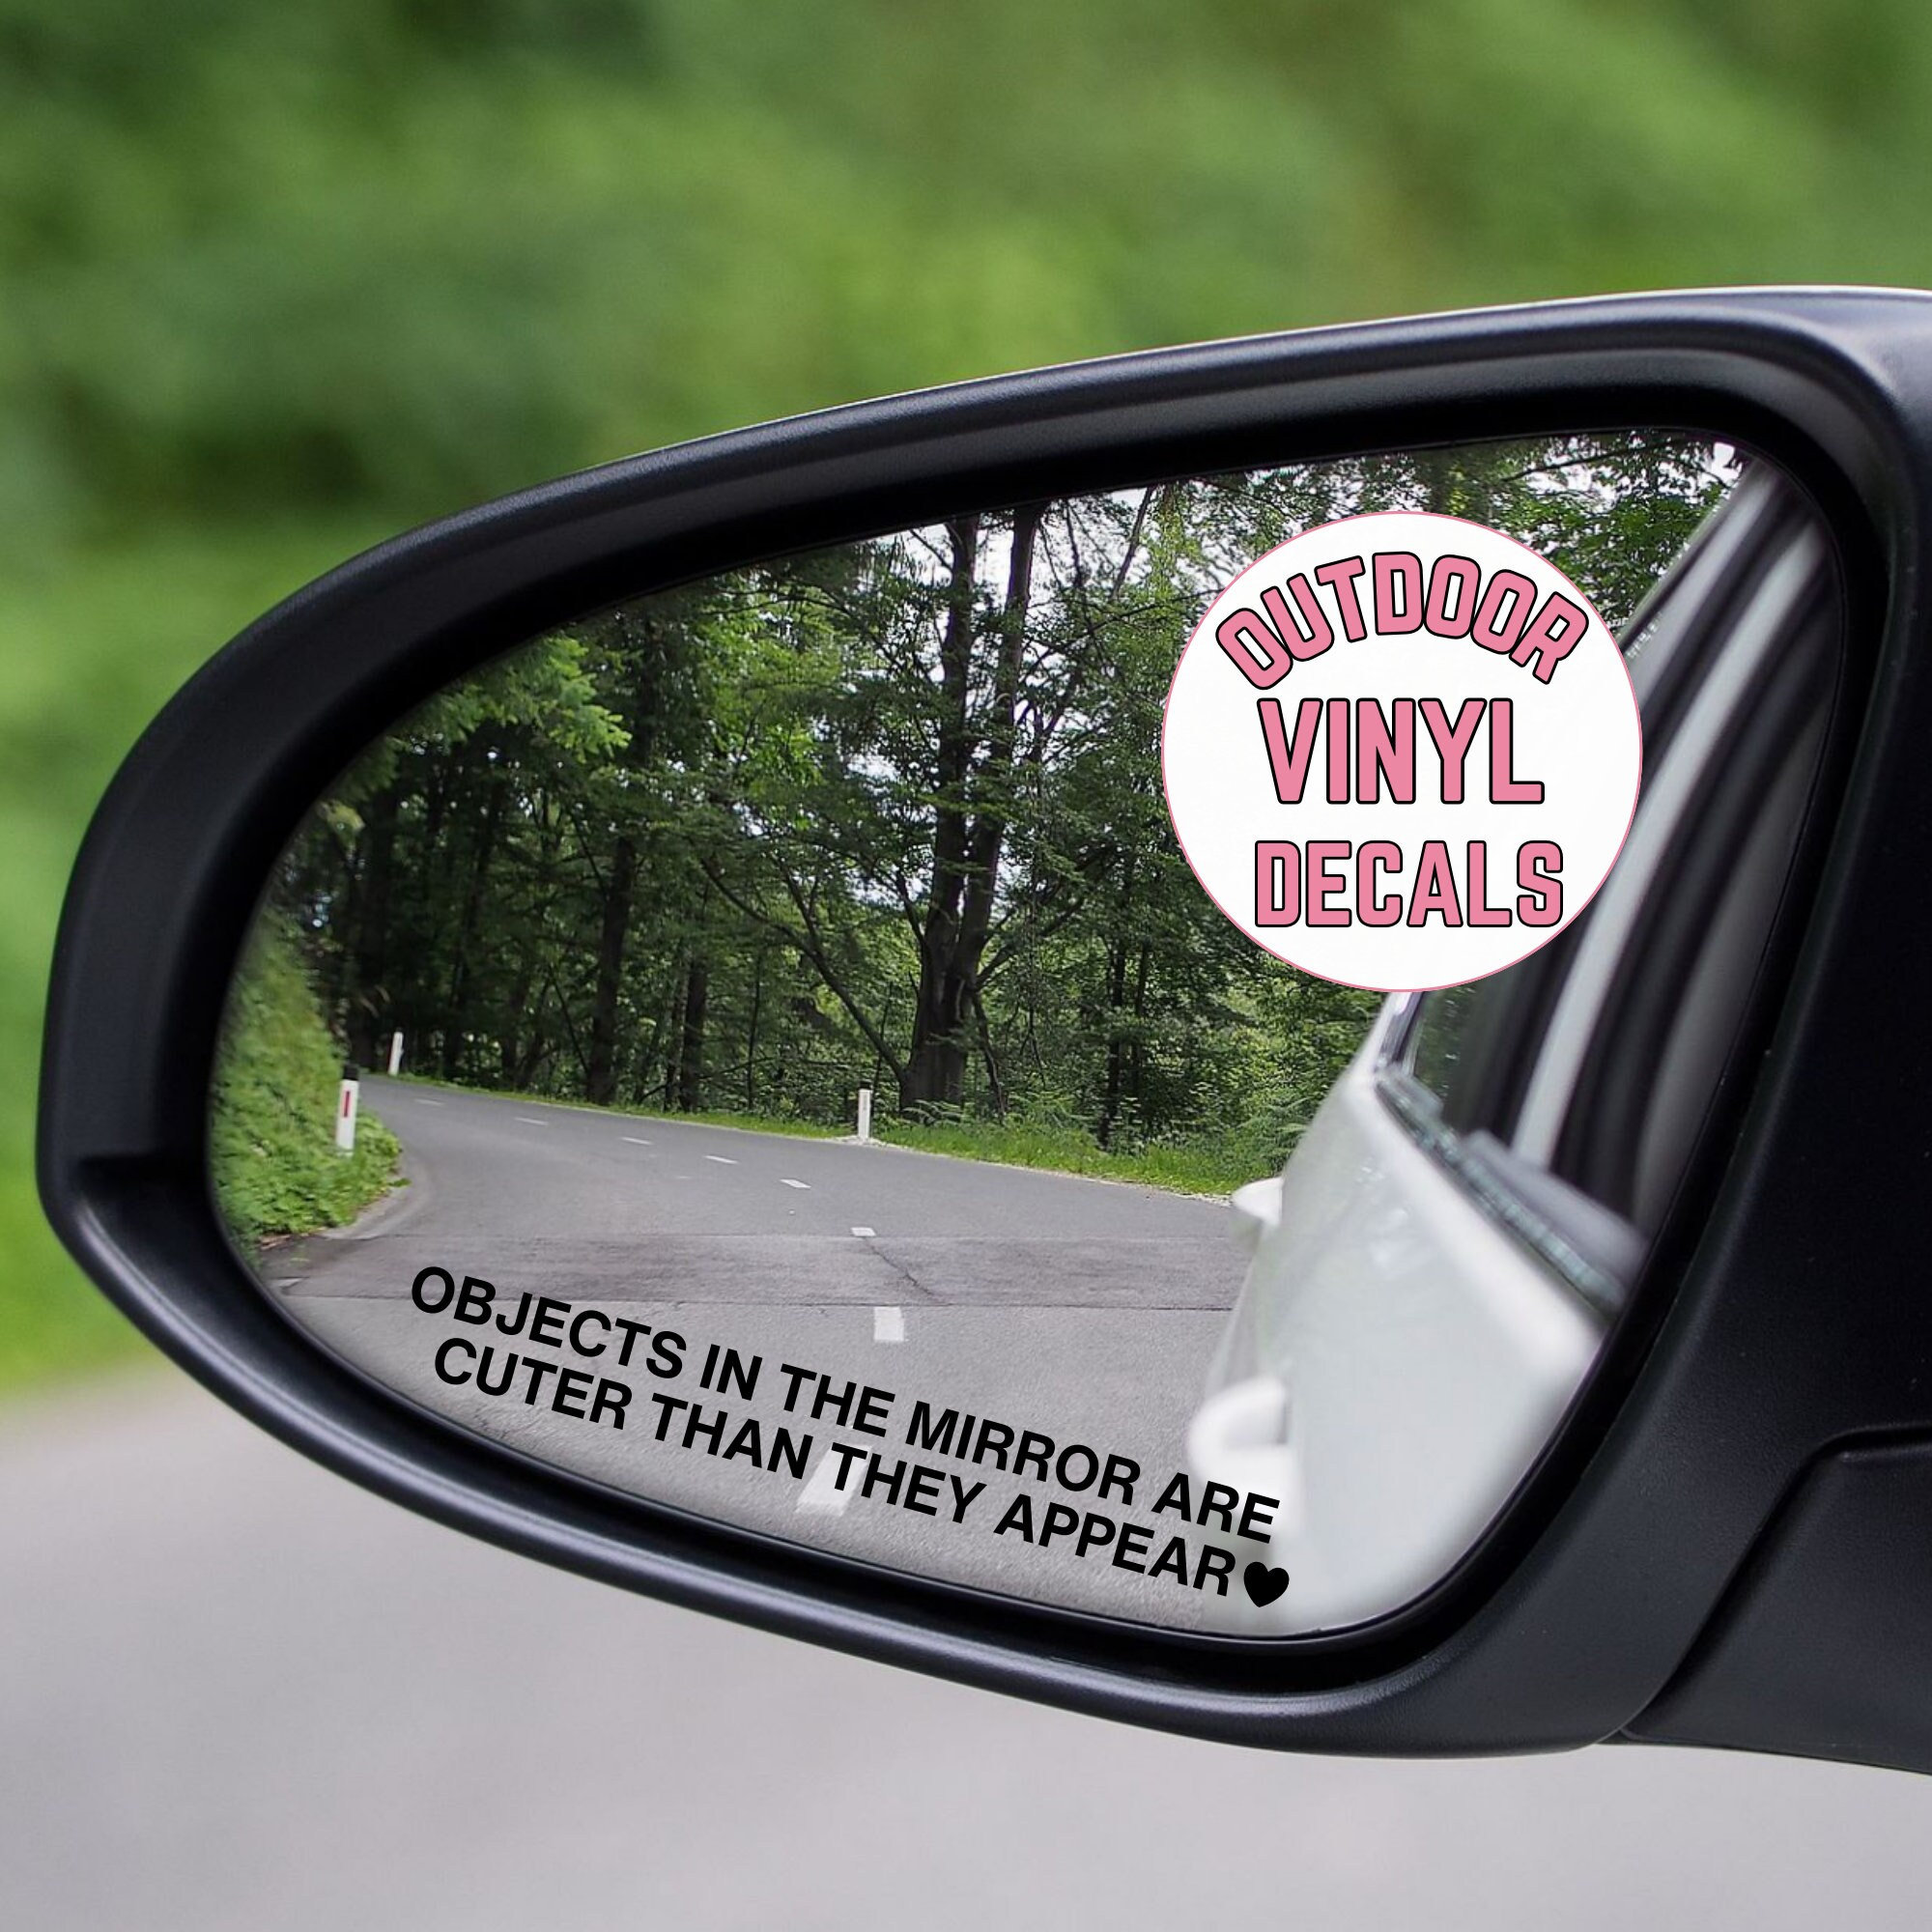 Objects in Mirror Are Cuter Than They Appear // Mirror Stickers / Vinyl  Sticker // Vinyl Name Decal // Car Decal for Women 